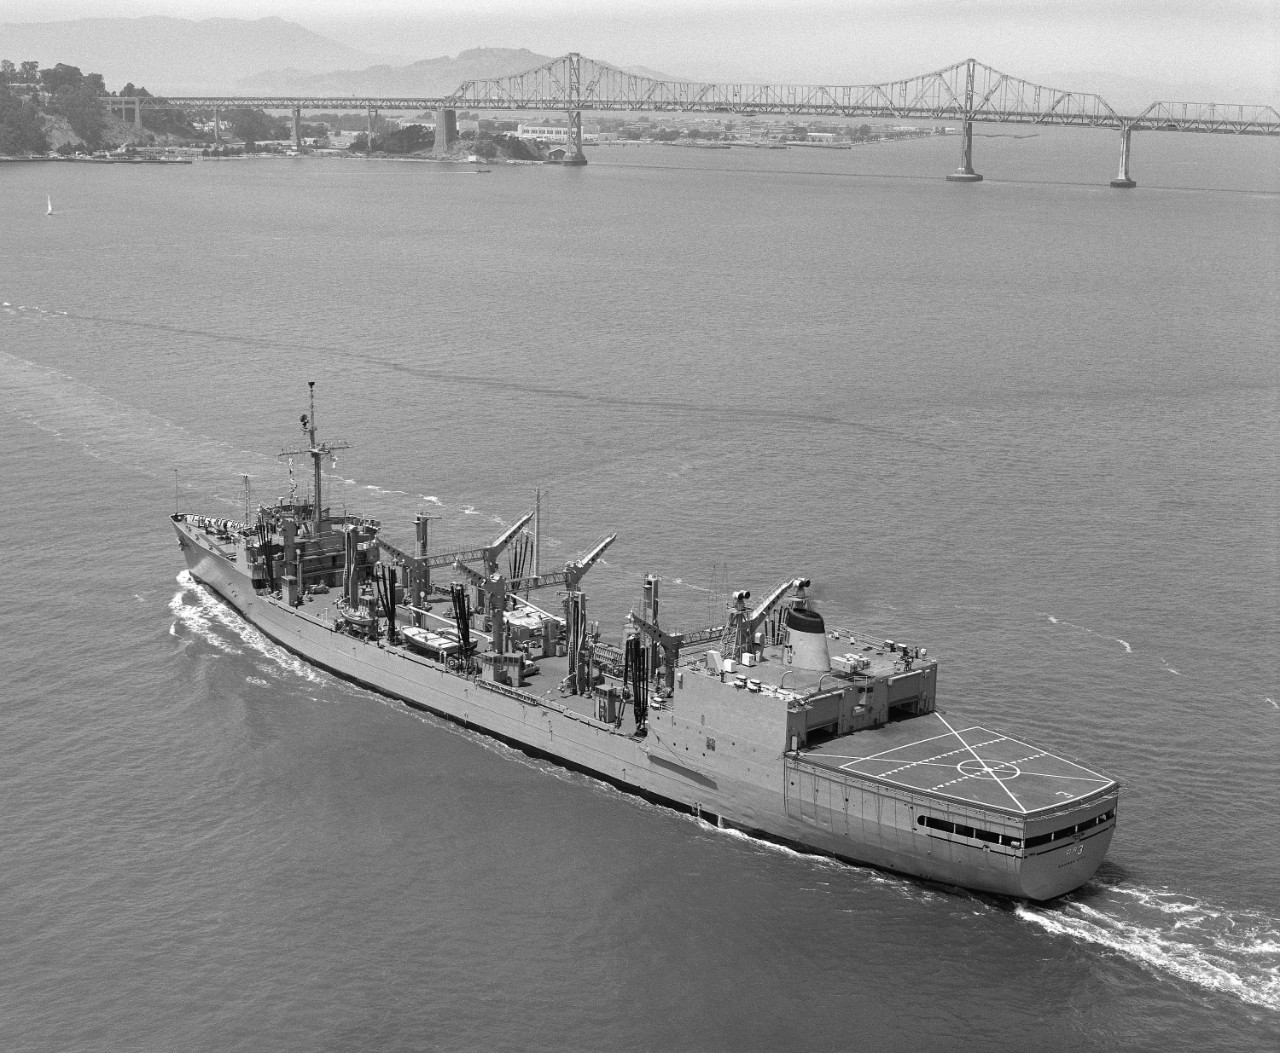 Kansas City underway in San Francisco Bay with the San Francisco-Oakland Bay Bridge in the background, August 1984. (U.S. Navy Photograph DN-SN-84-10221, National Archives and Records Administration, Still Pictures Division, College Park, Md.)